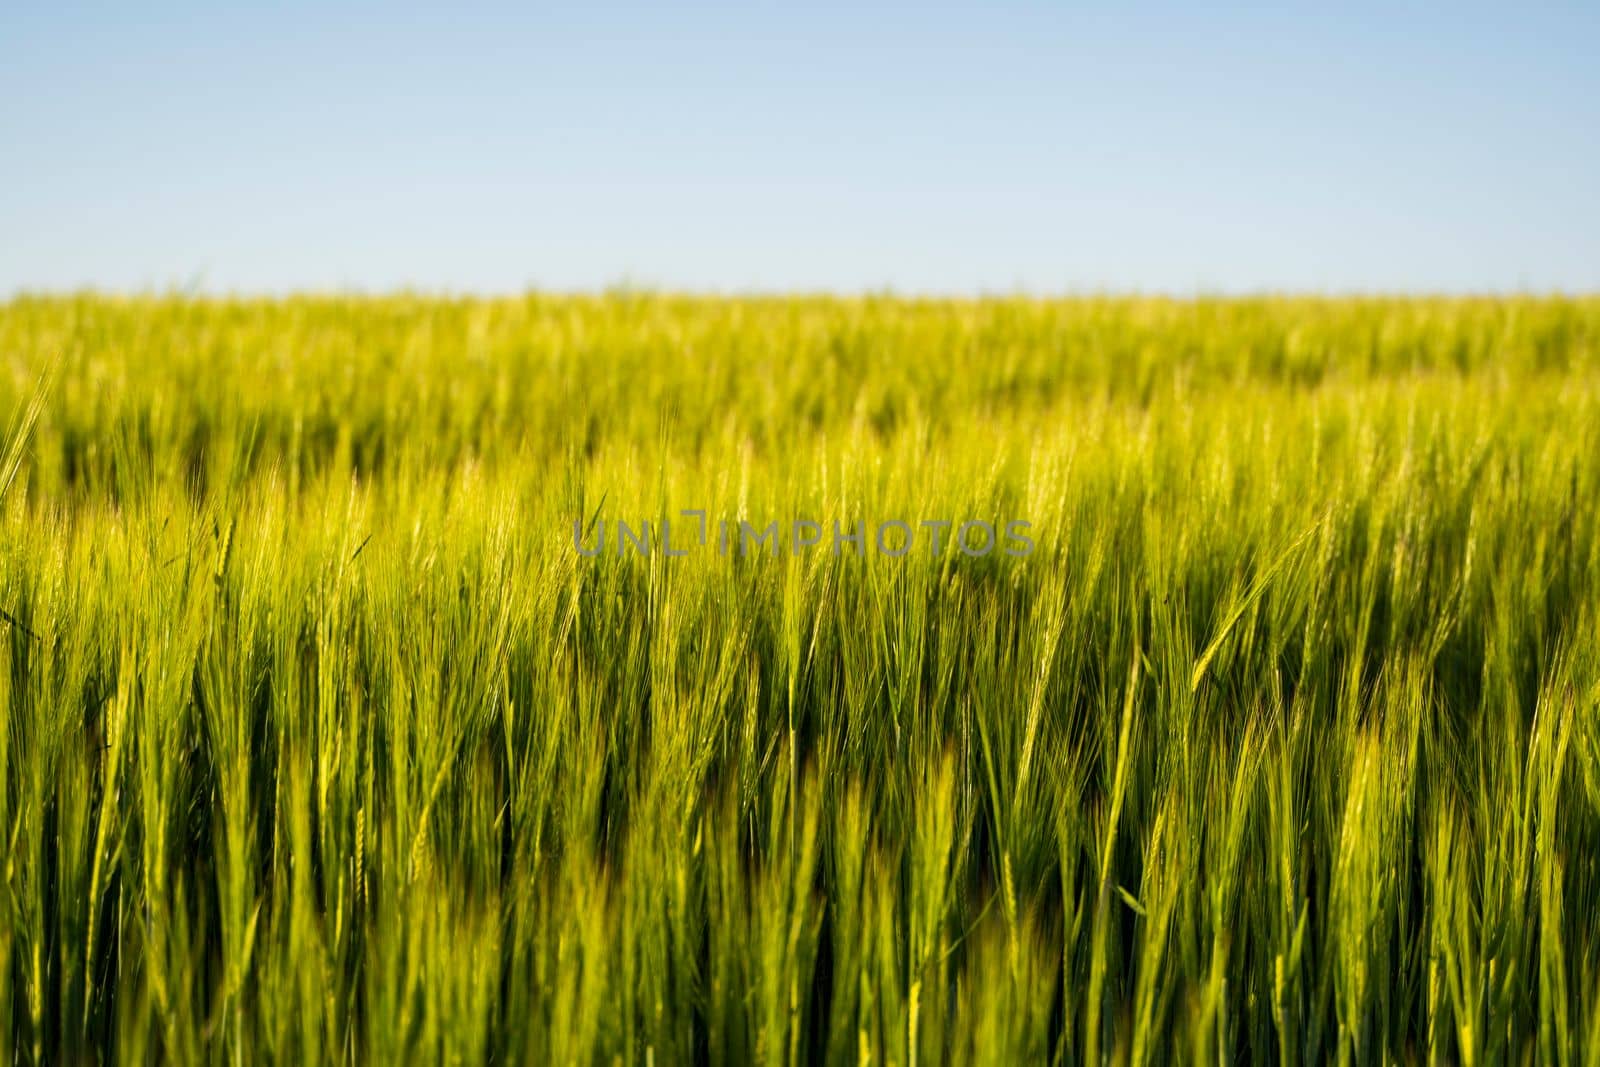 Green barley, wheat ear growing in agricultural field. Green unripe cereals. The concept of agriculture, healthy eating, organic food. by vovsht